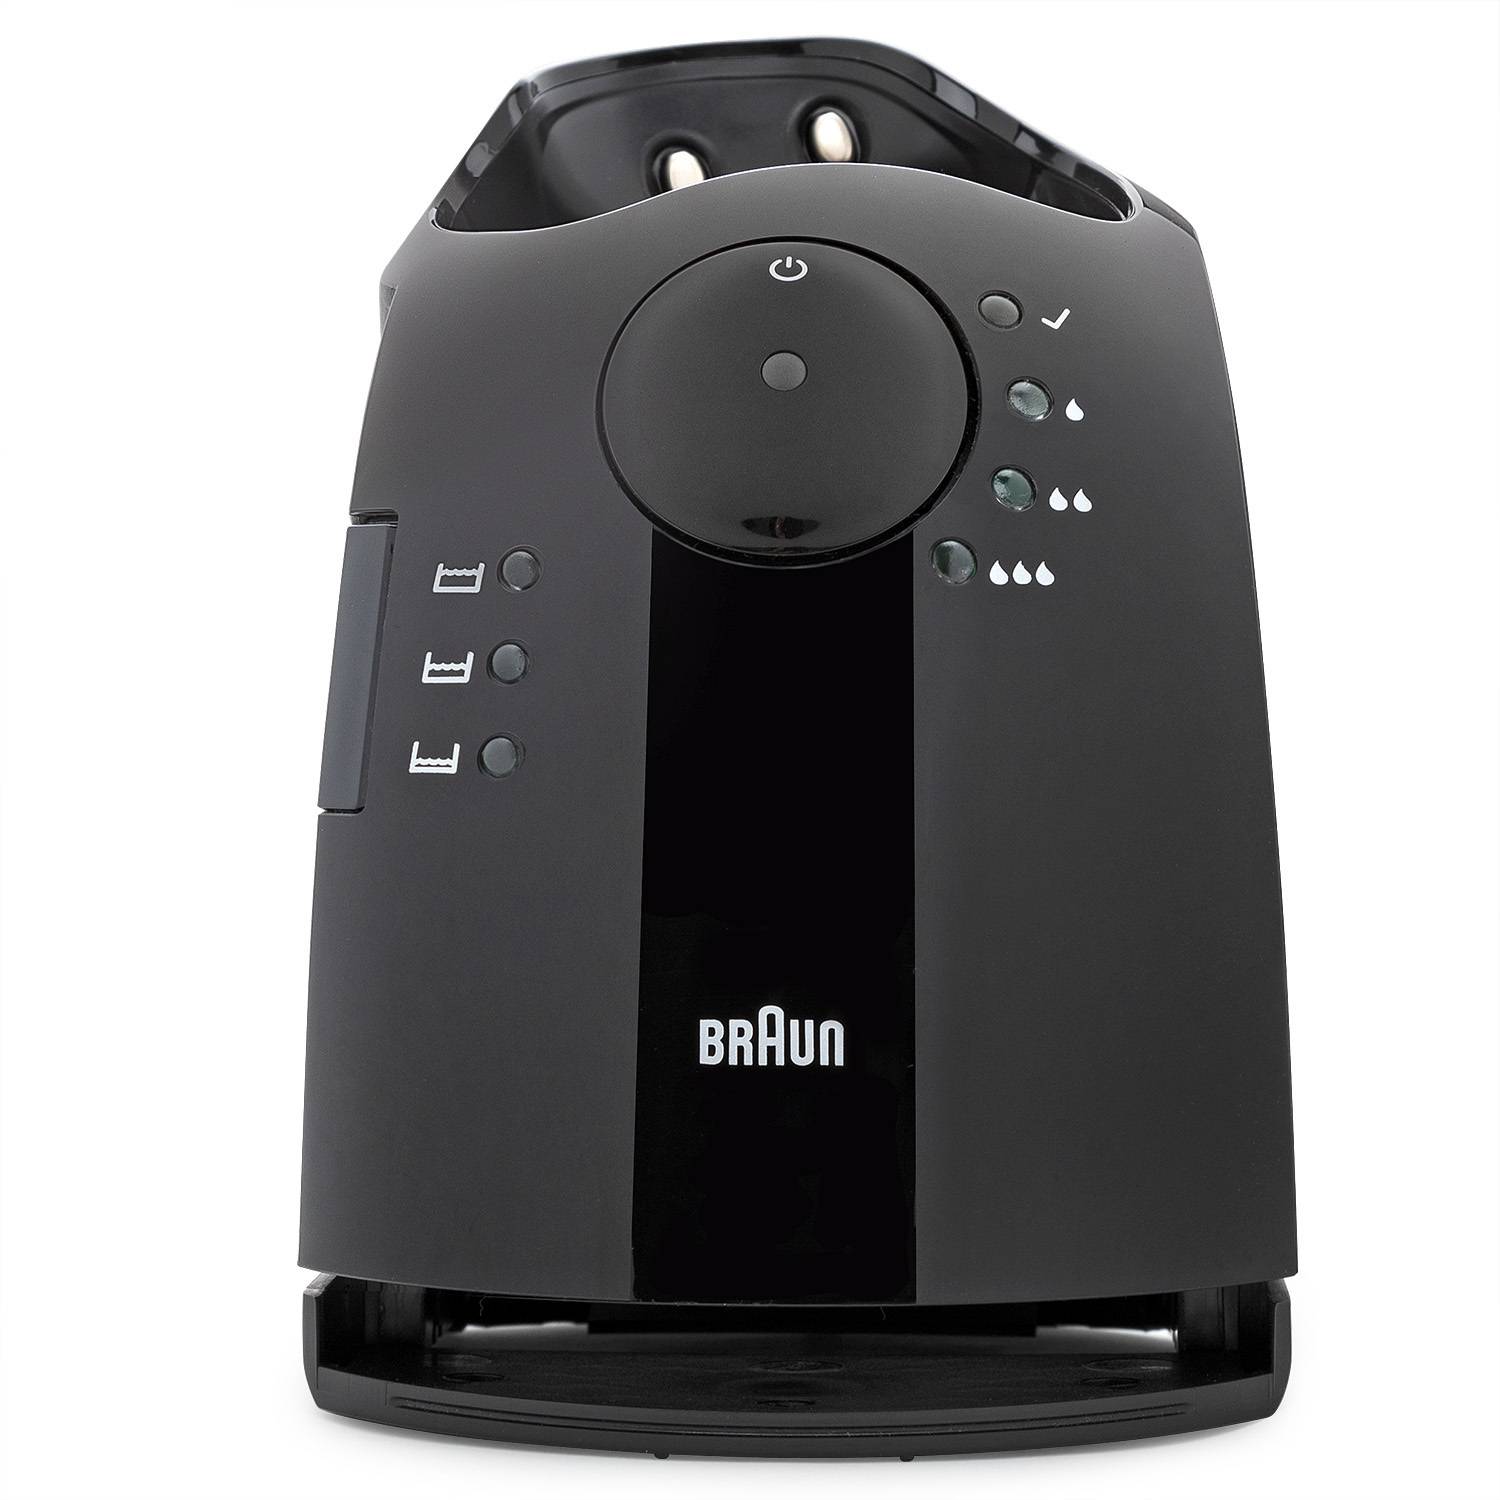 Braun Clean and Charge Station for Pulsonic Series 7 Shavers (Black)